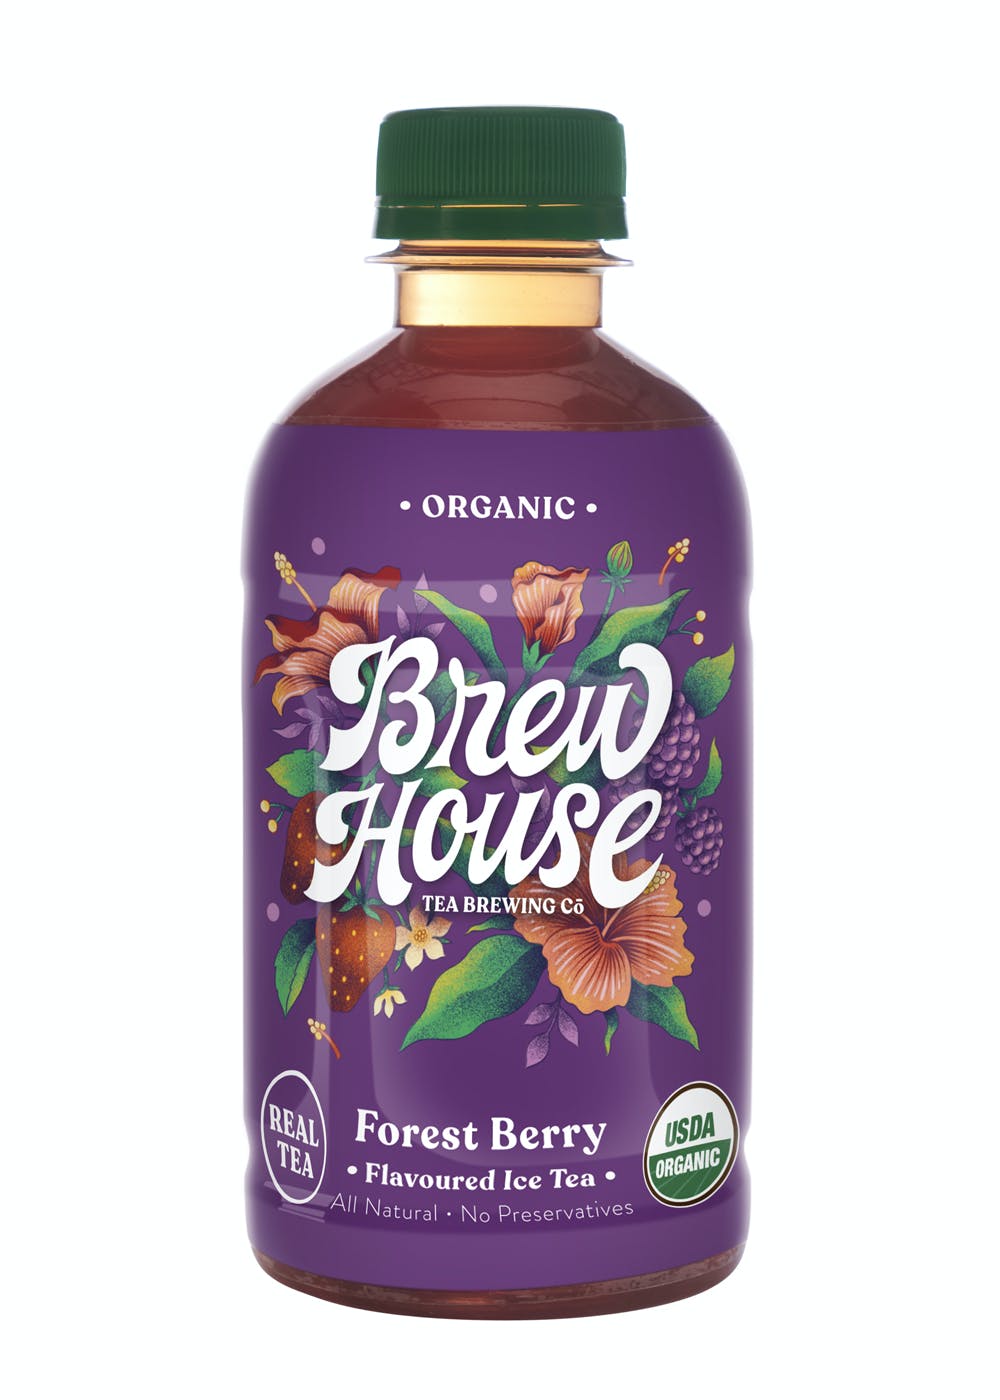 BrewHouse Tea Brewing Co. Naturally Brewed Organic Ice Tea